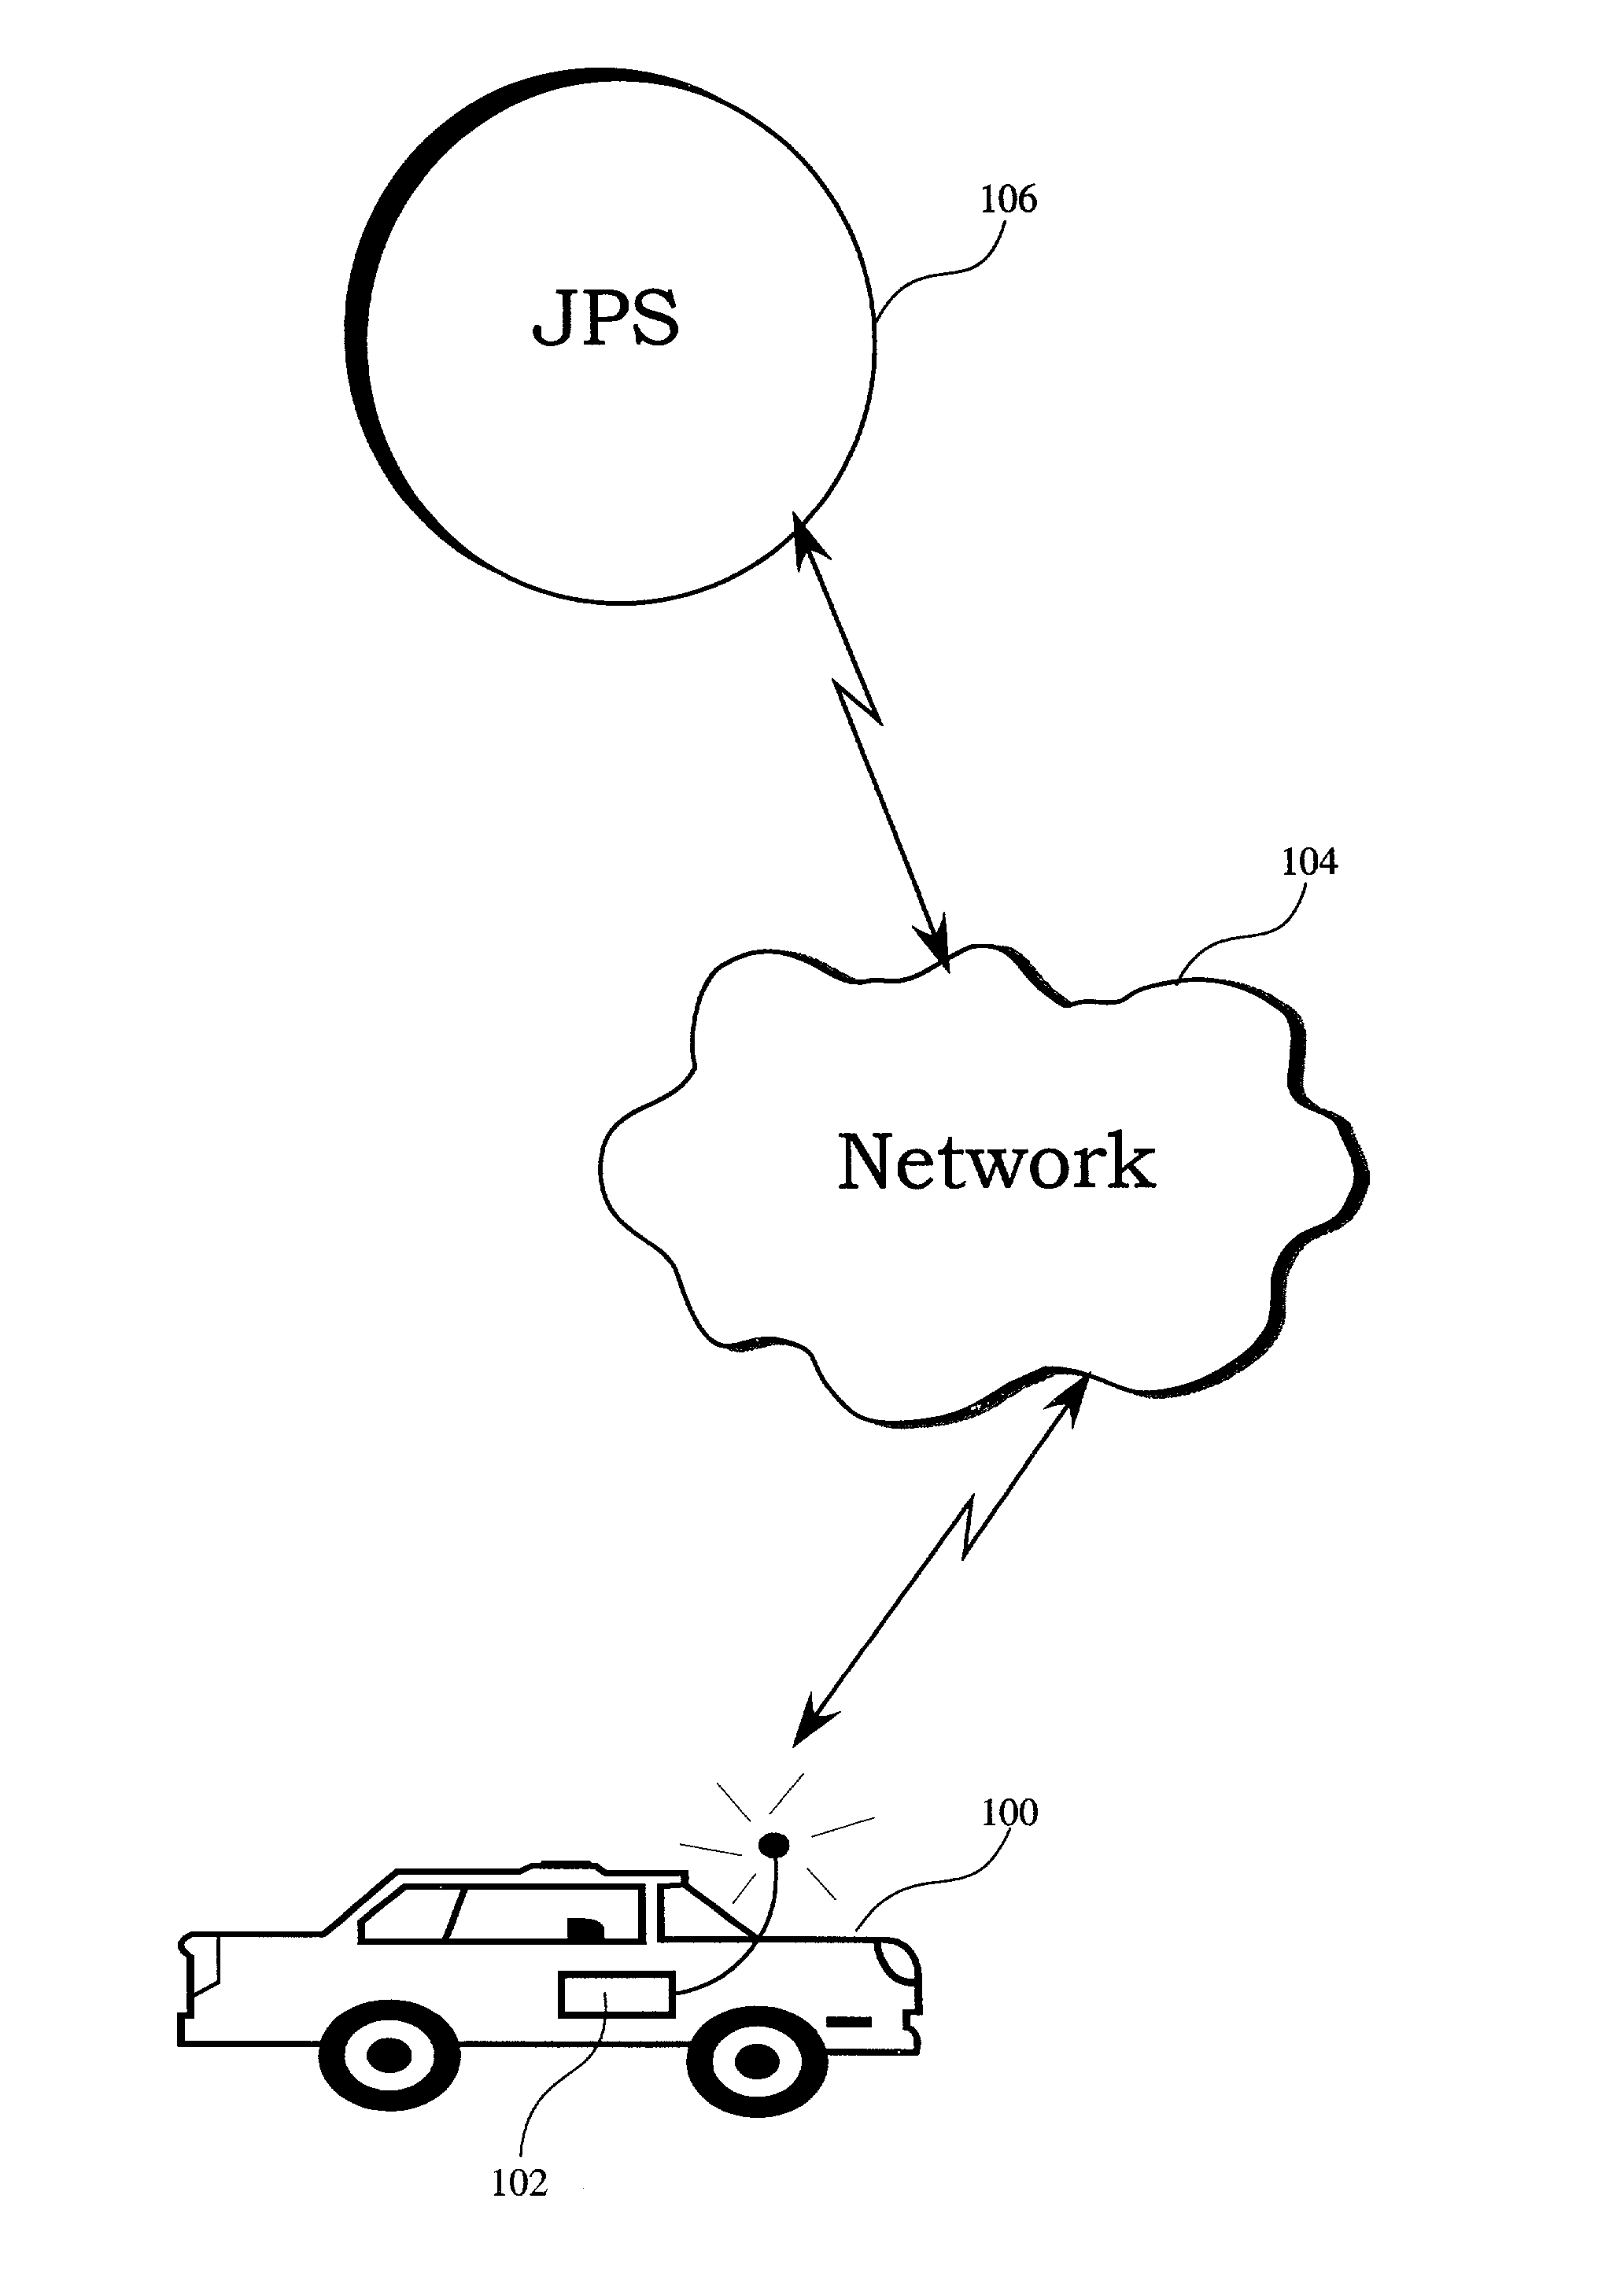 Manager level device/service arbitrator and methods